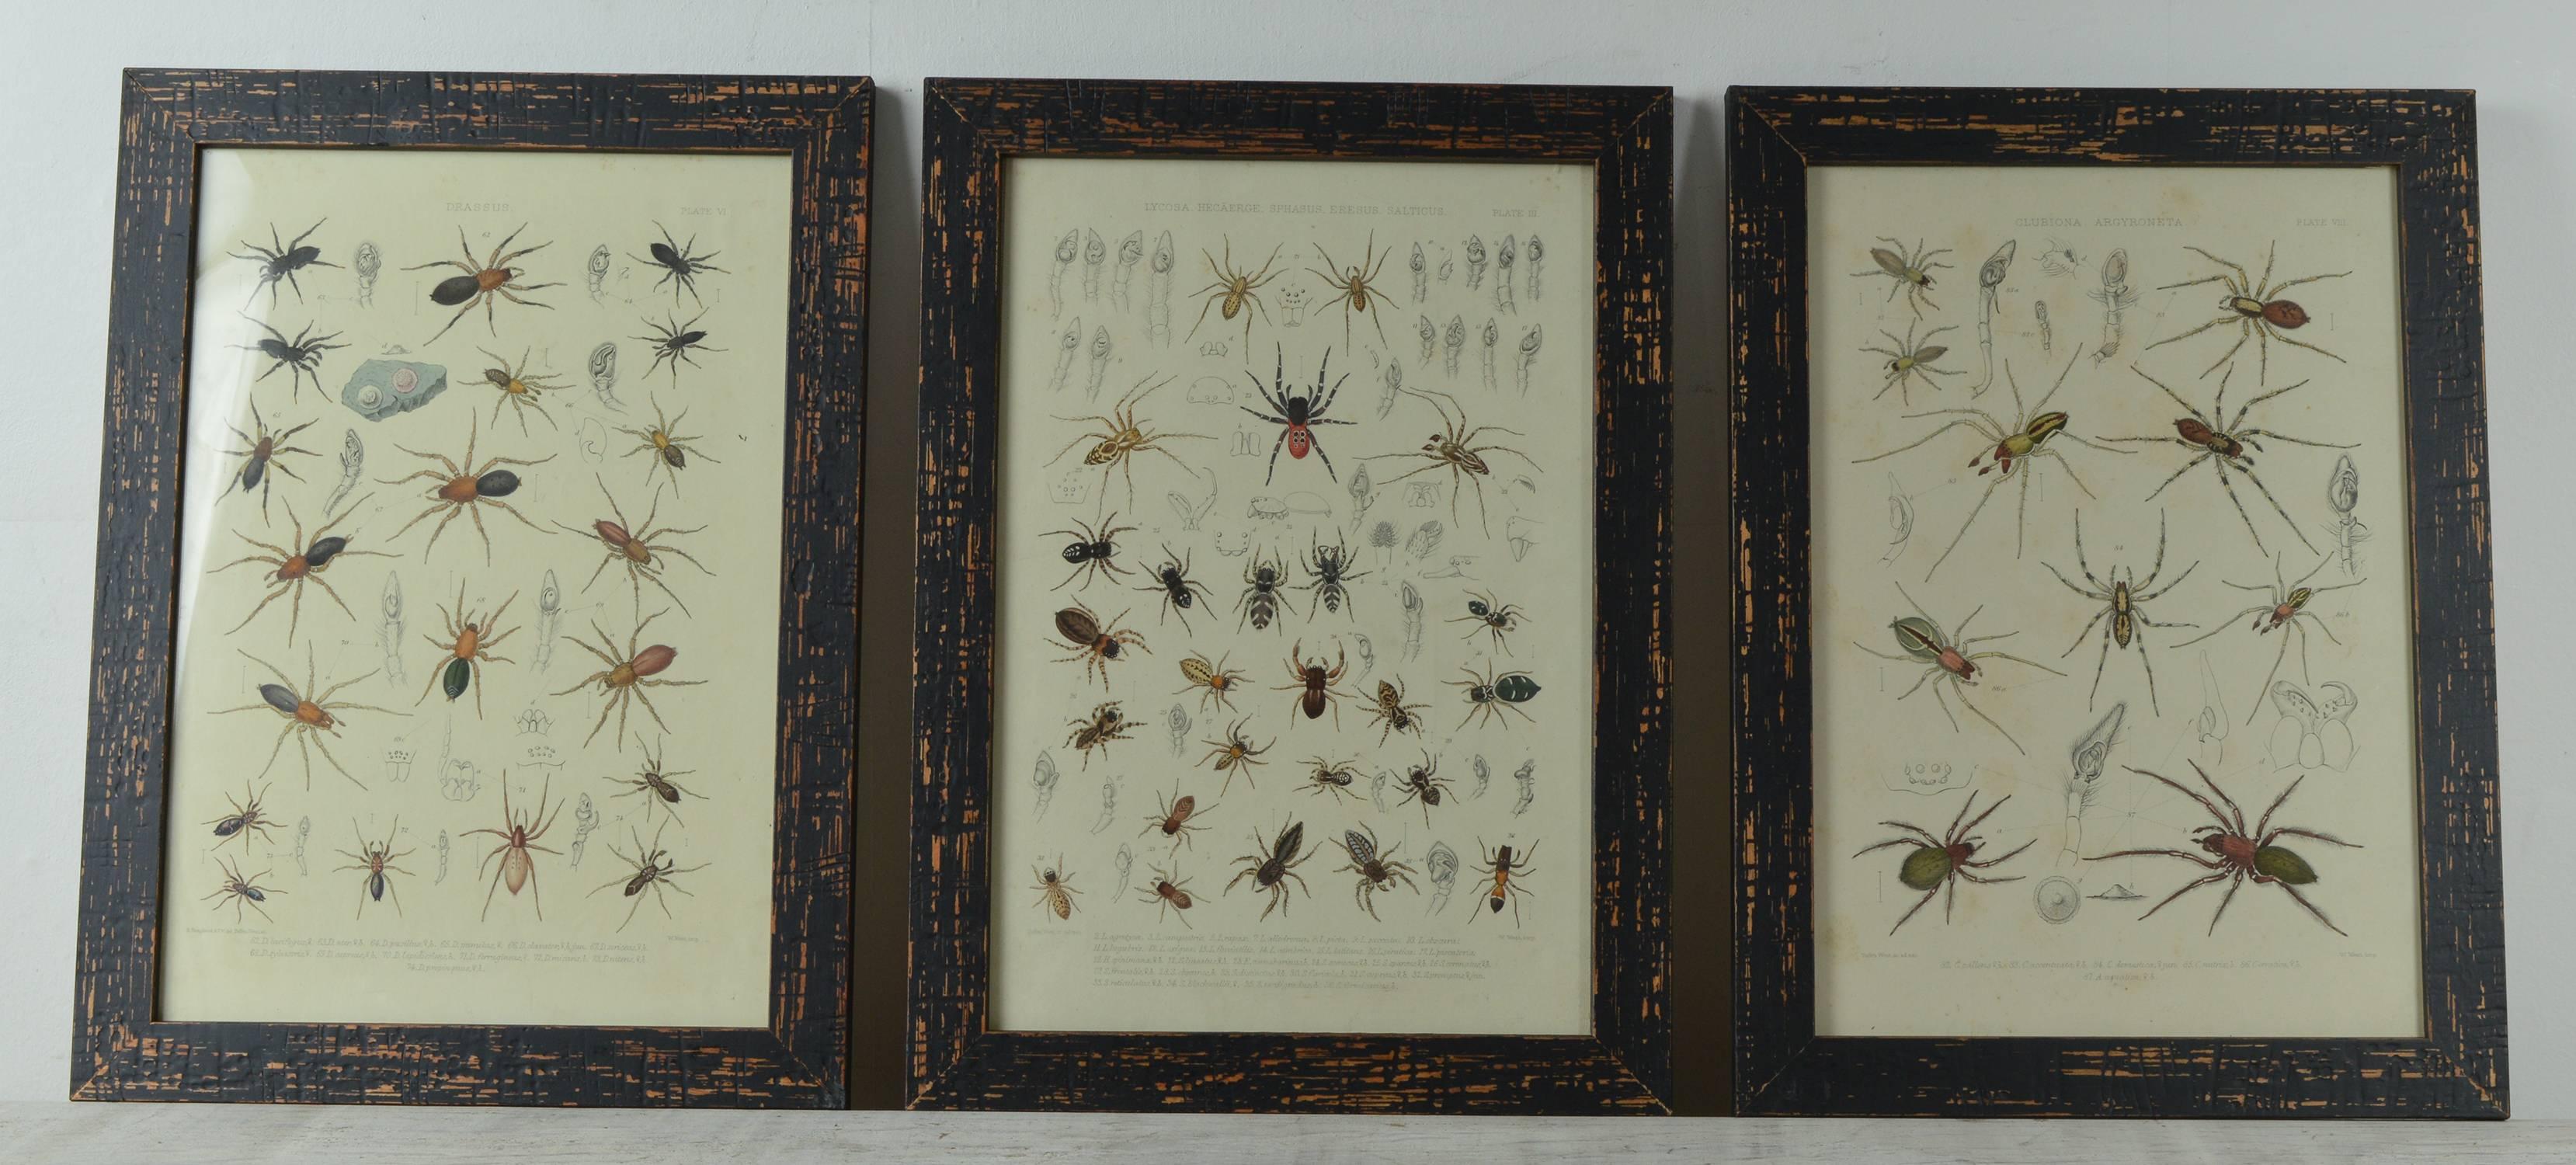 Other Set of 12 Original Antique Prints of Spiders, 1861